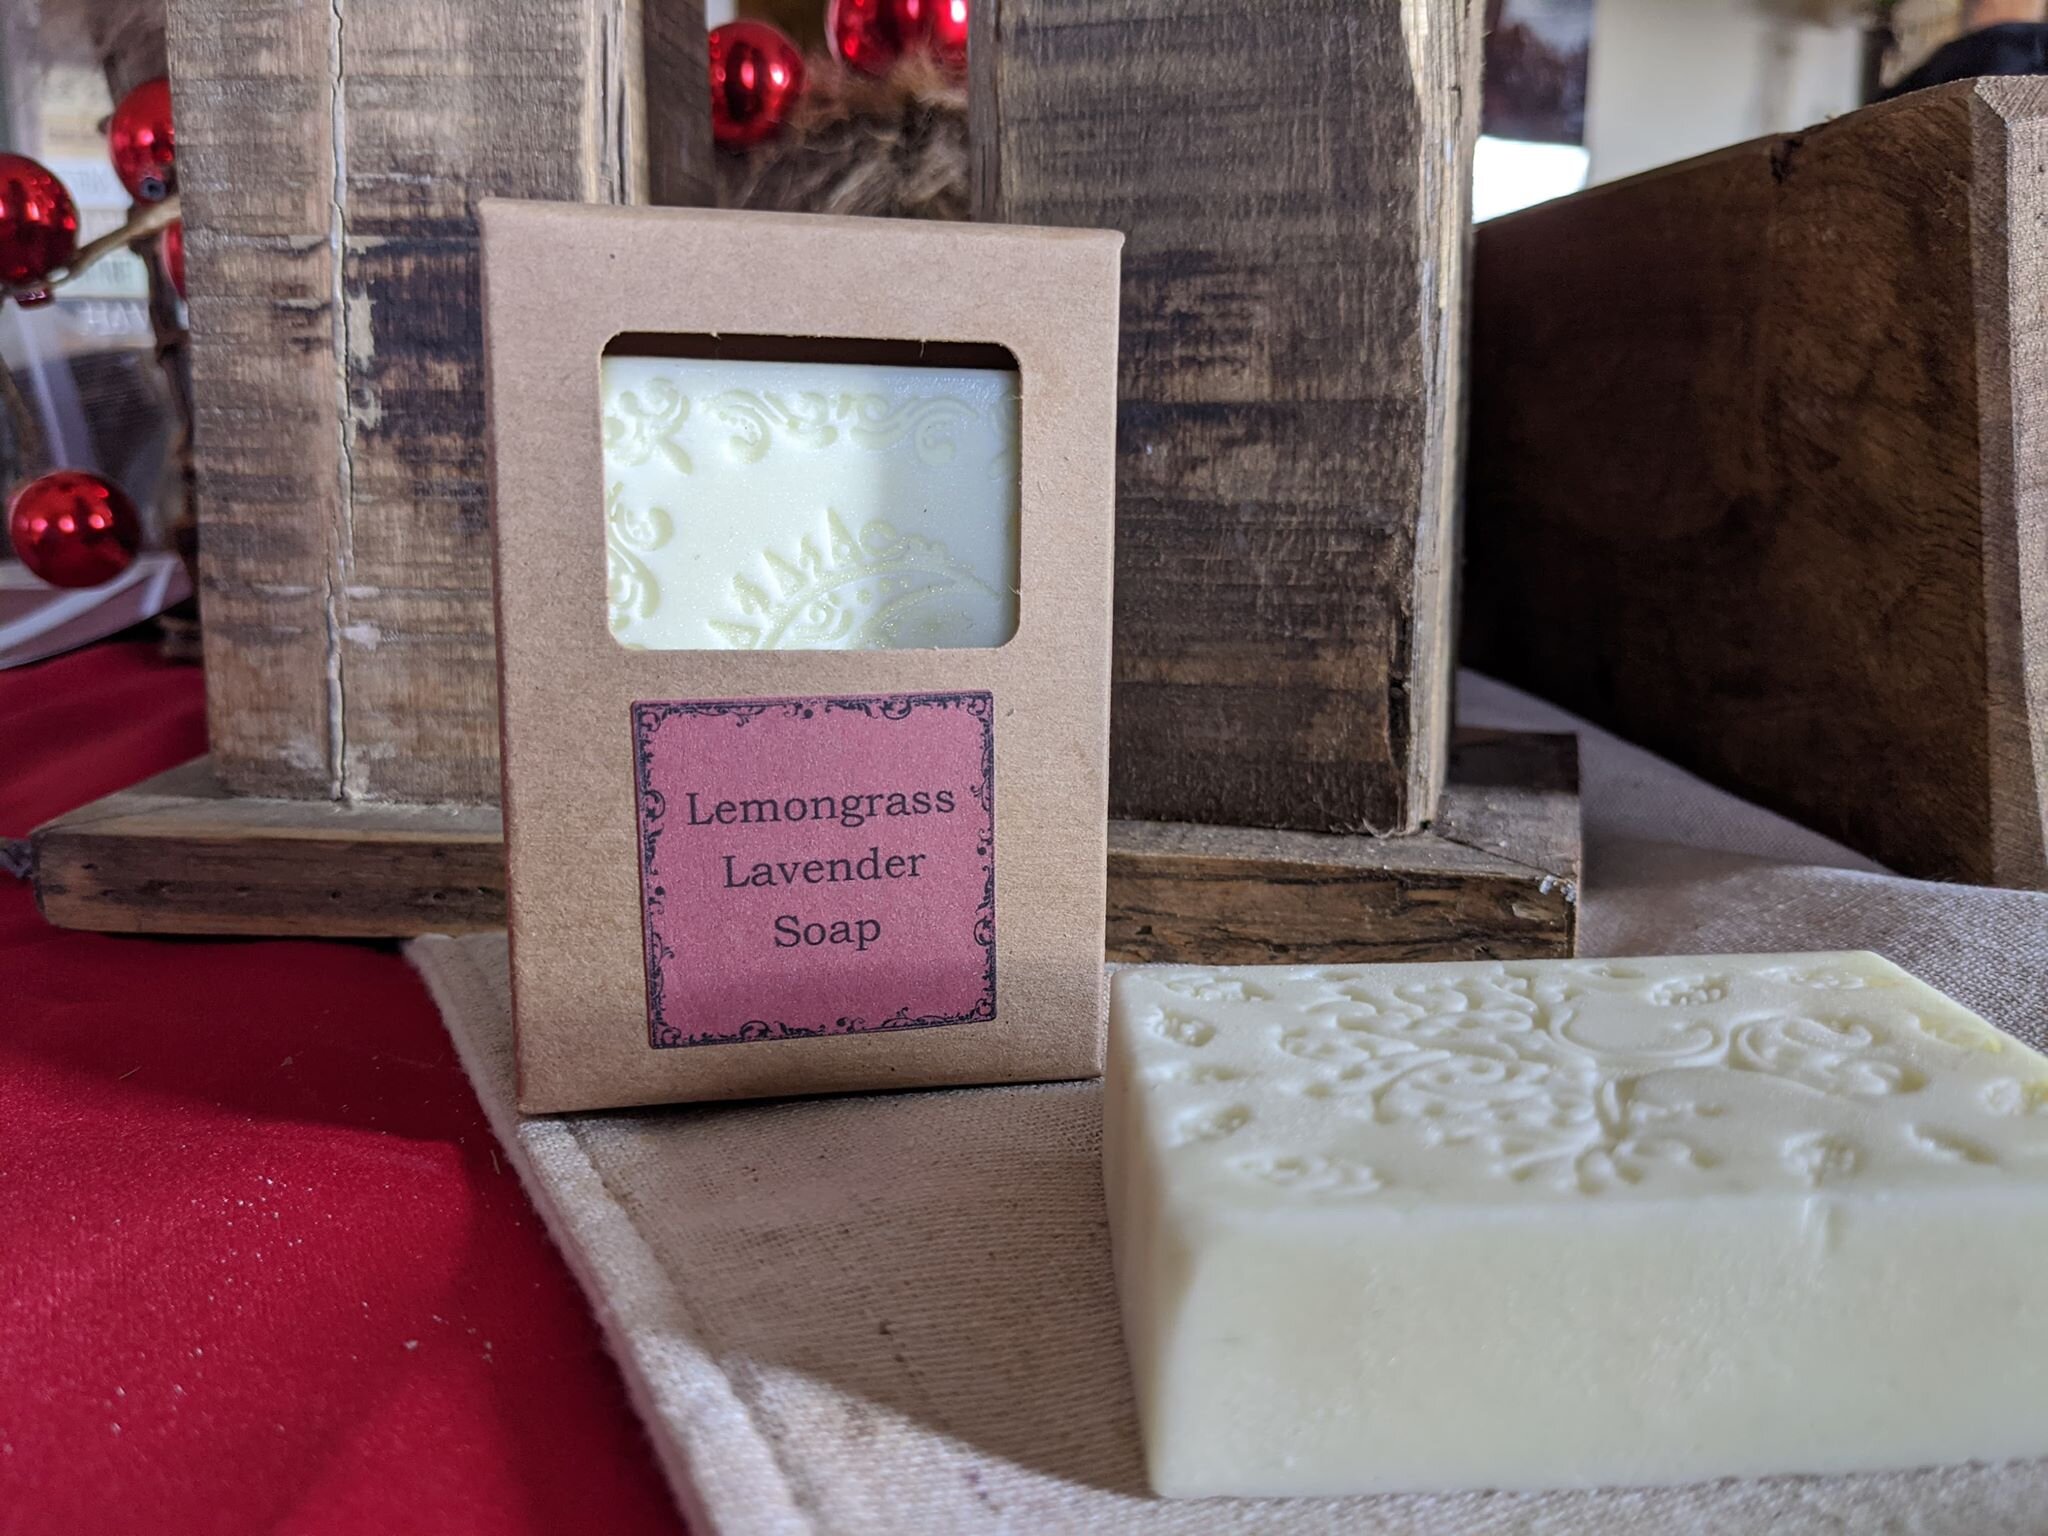 Lemongrass Lavender Soap - The Simply Good Goats Milk Lemongrass Lavender Soap is made using 100% Pure Therapeutic Grade Lemongrass and Bulgarian Lavender Essential Oils.  This soap was designed to relieve stress, promote relaxation and fight depression.  Lemongrass and Bulgarian Lavender Essential Oils are known to have antibacterial and anti-inflammatory properties.